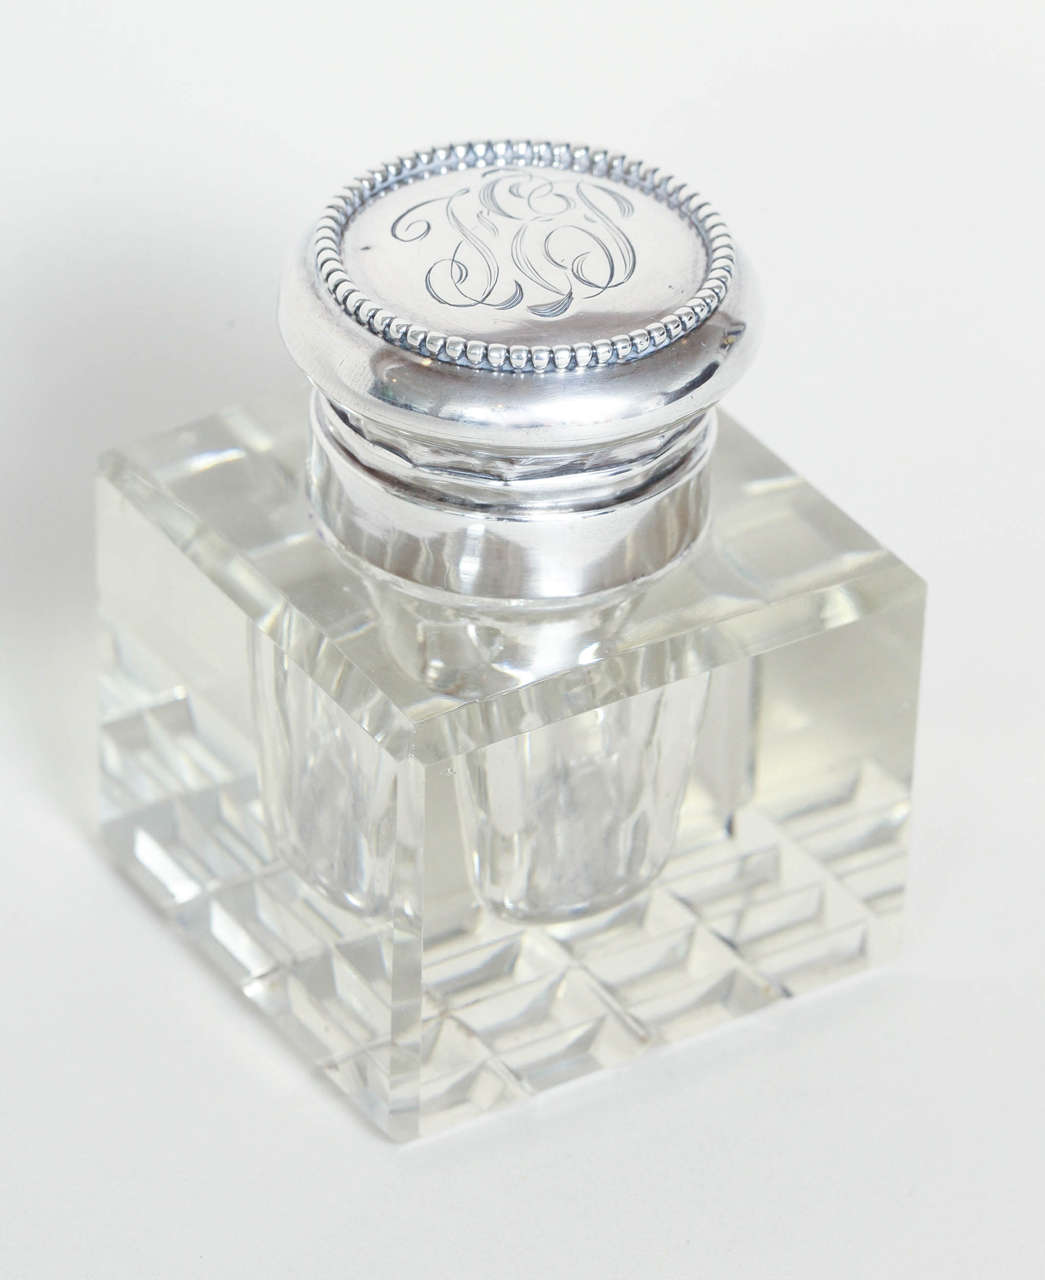 Cubic crystal inkwell/paperweight with base of 16 beveled squares.
Monogrammed TEP on top.

Hallmarked STERLING/1928.